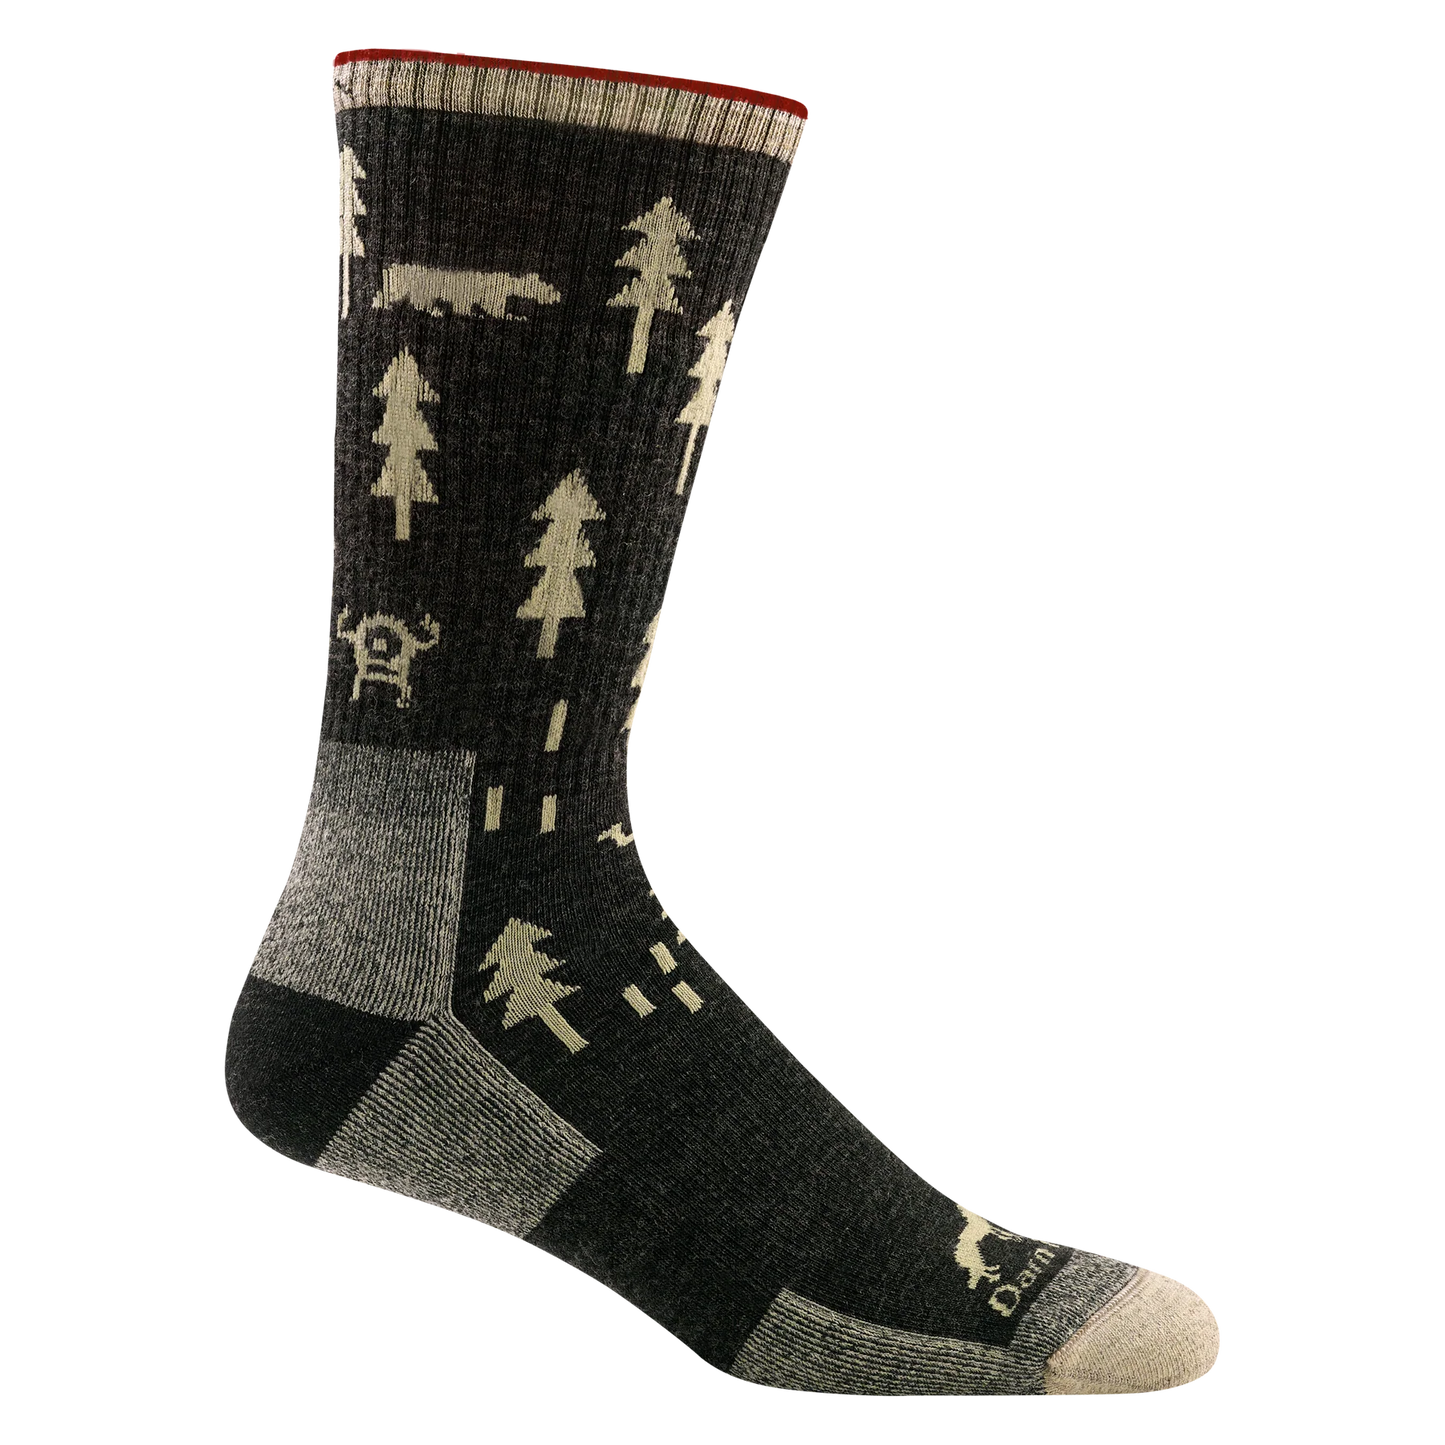 Darn tough olive green sock with cream forest geometric print